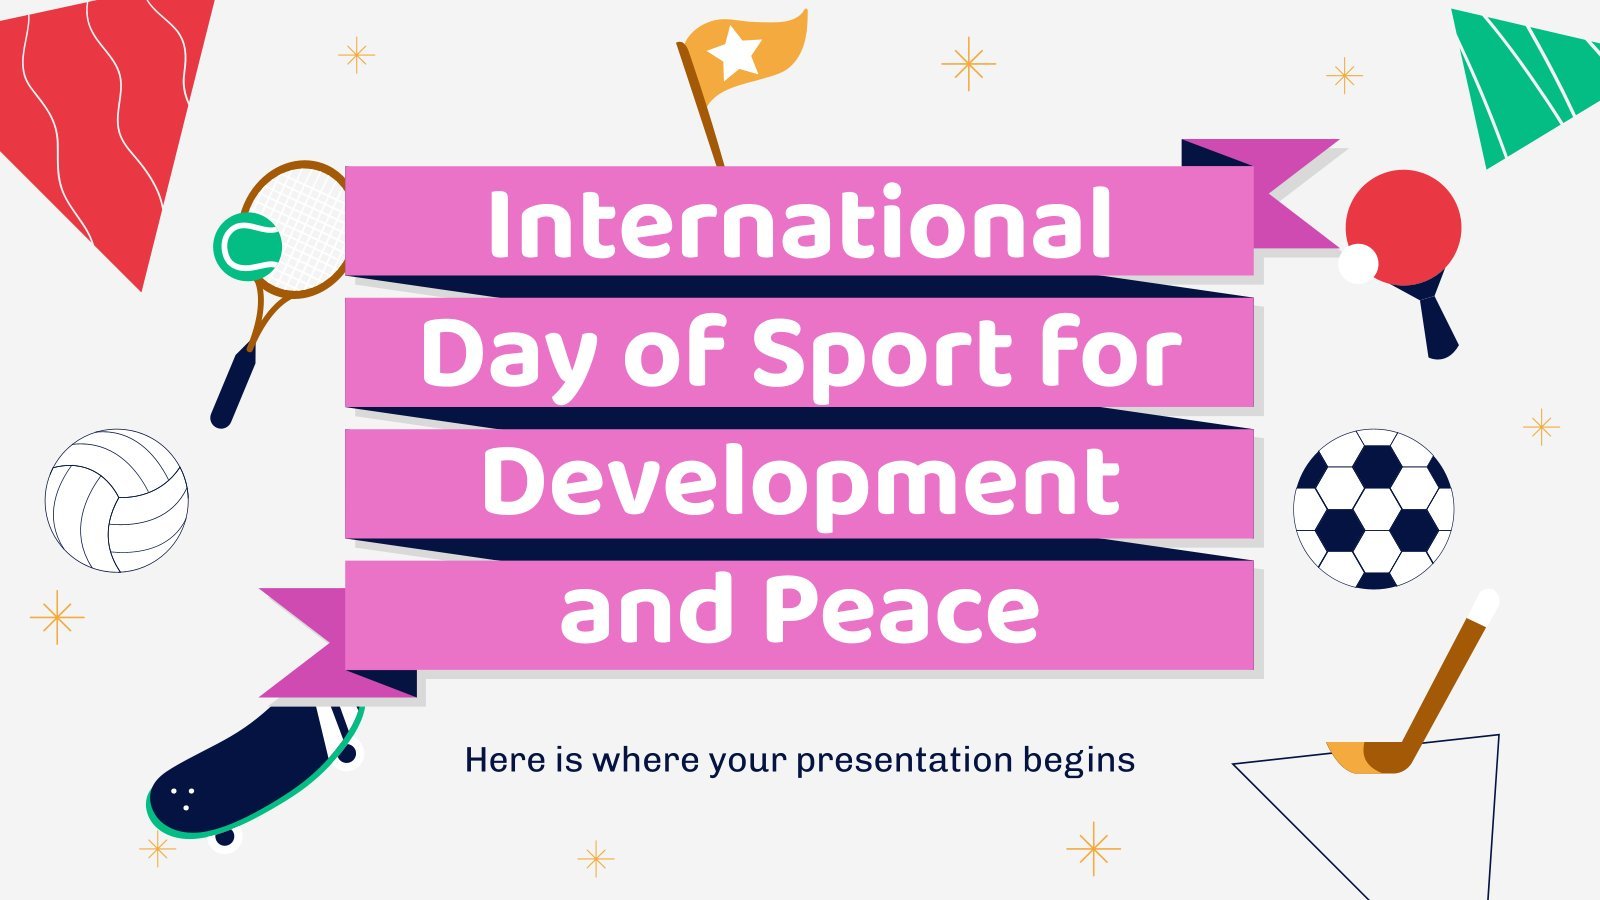 International Day of Sport for Development and Peace presentation template 